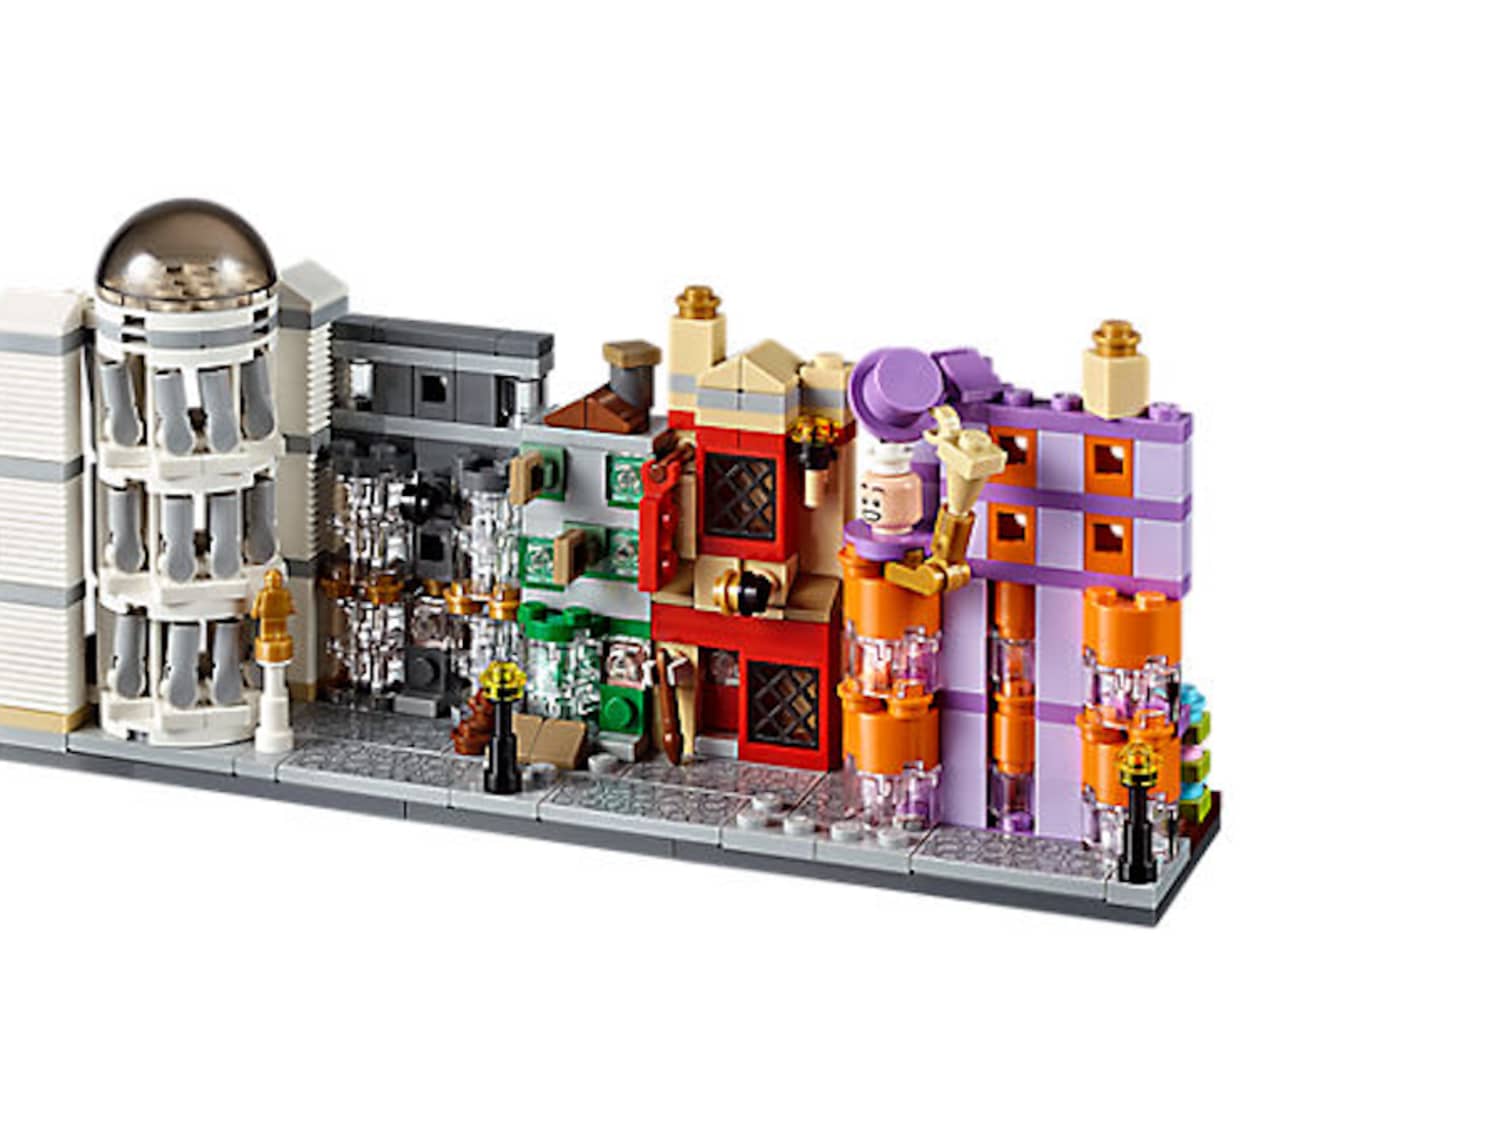 LEGO Is Giving Away a Diagon Alley Set This November | Apartment Therapy